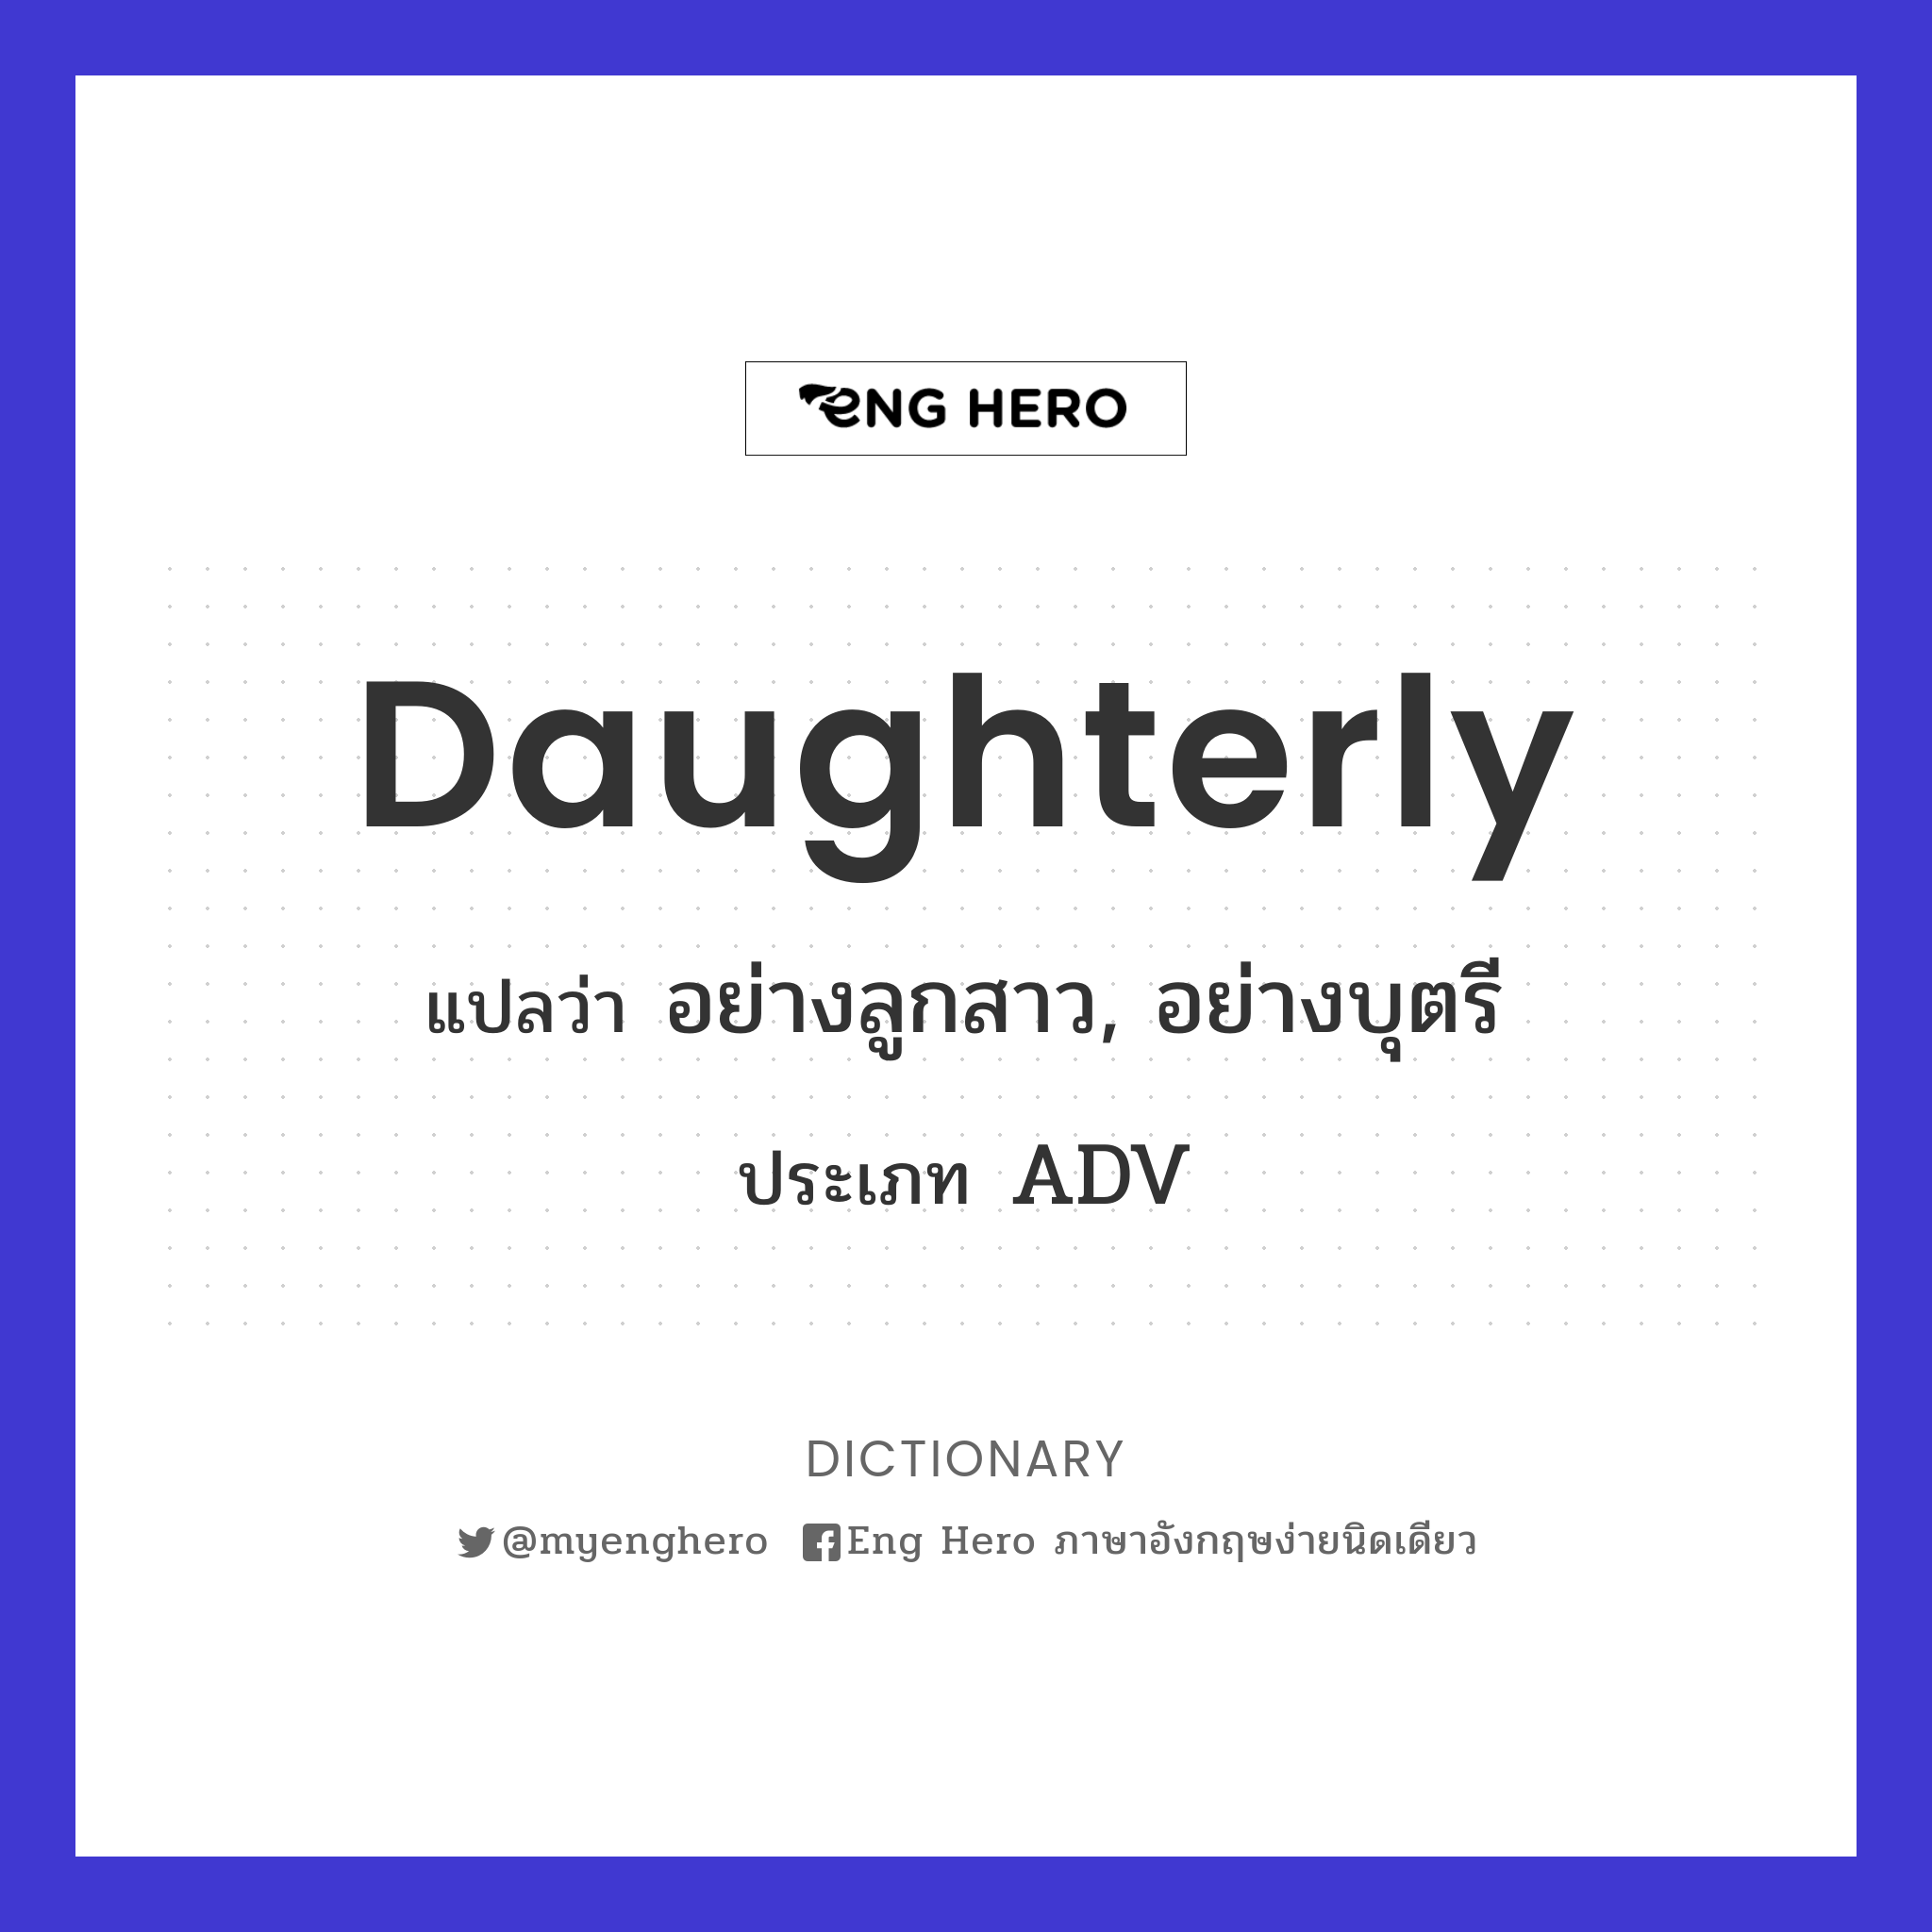 daughterly